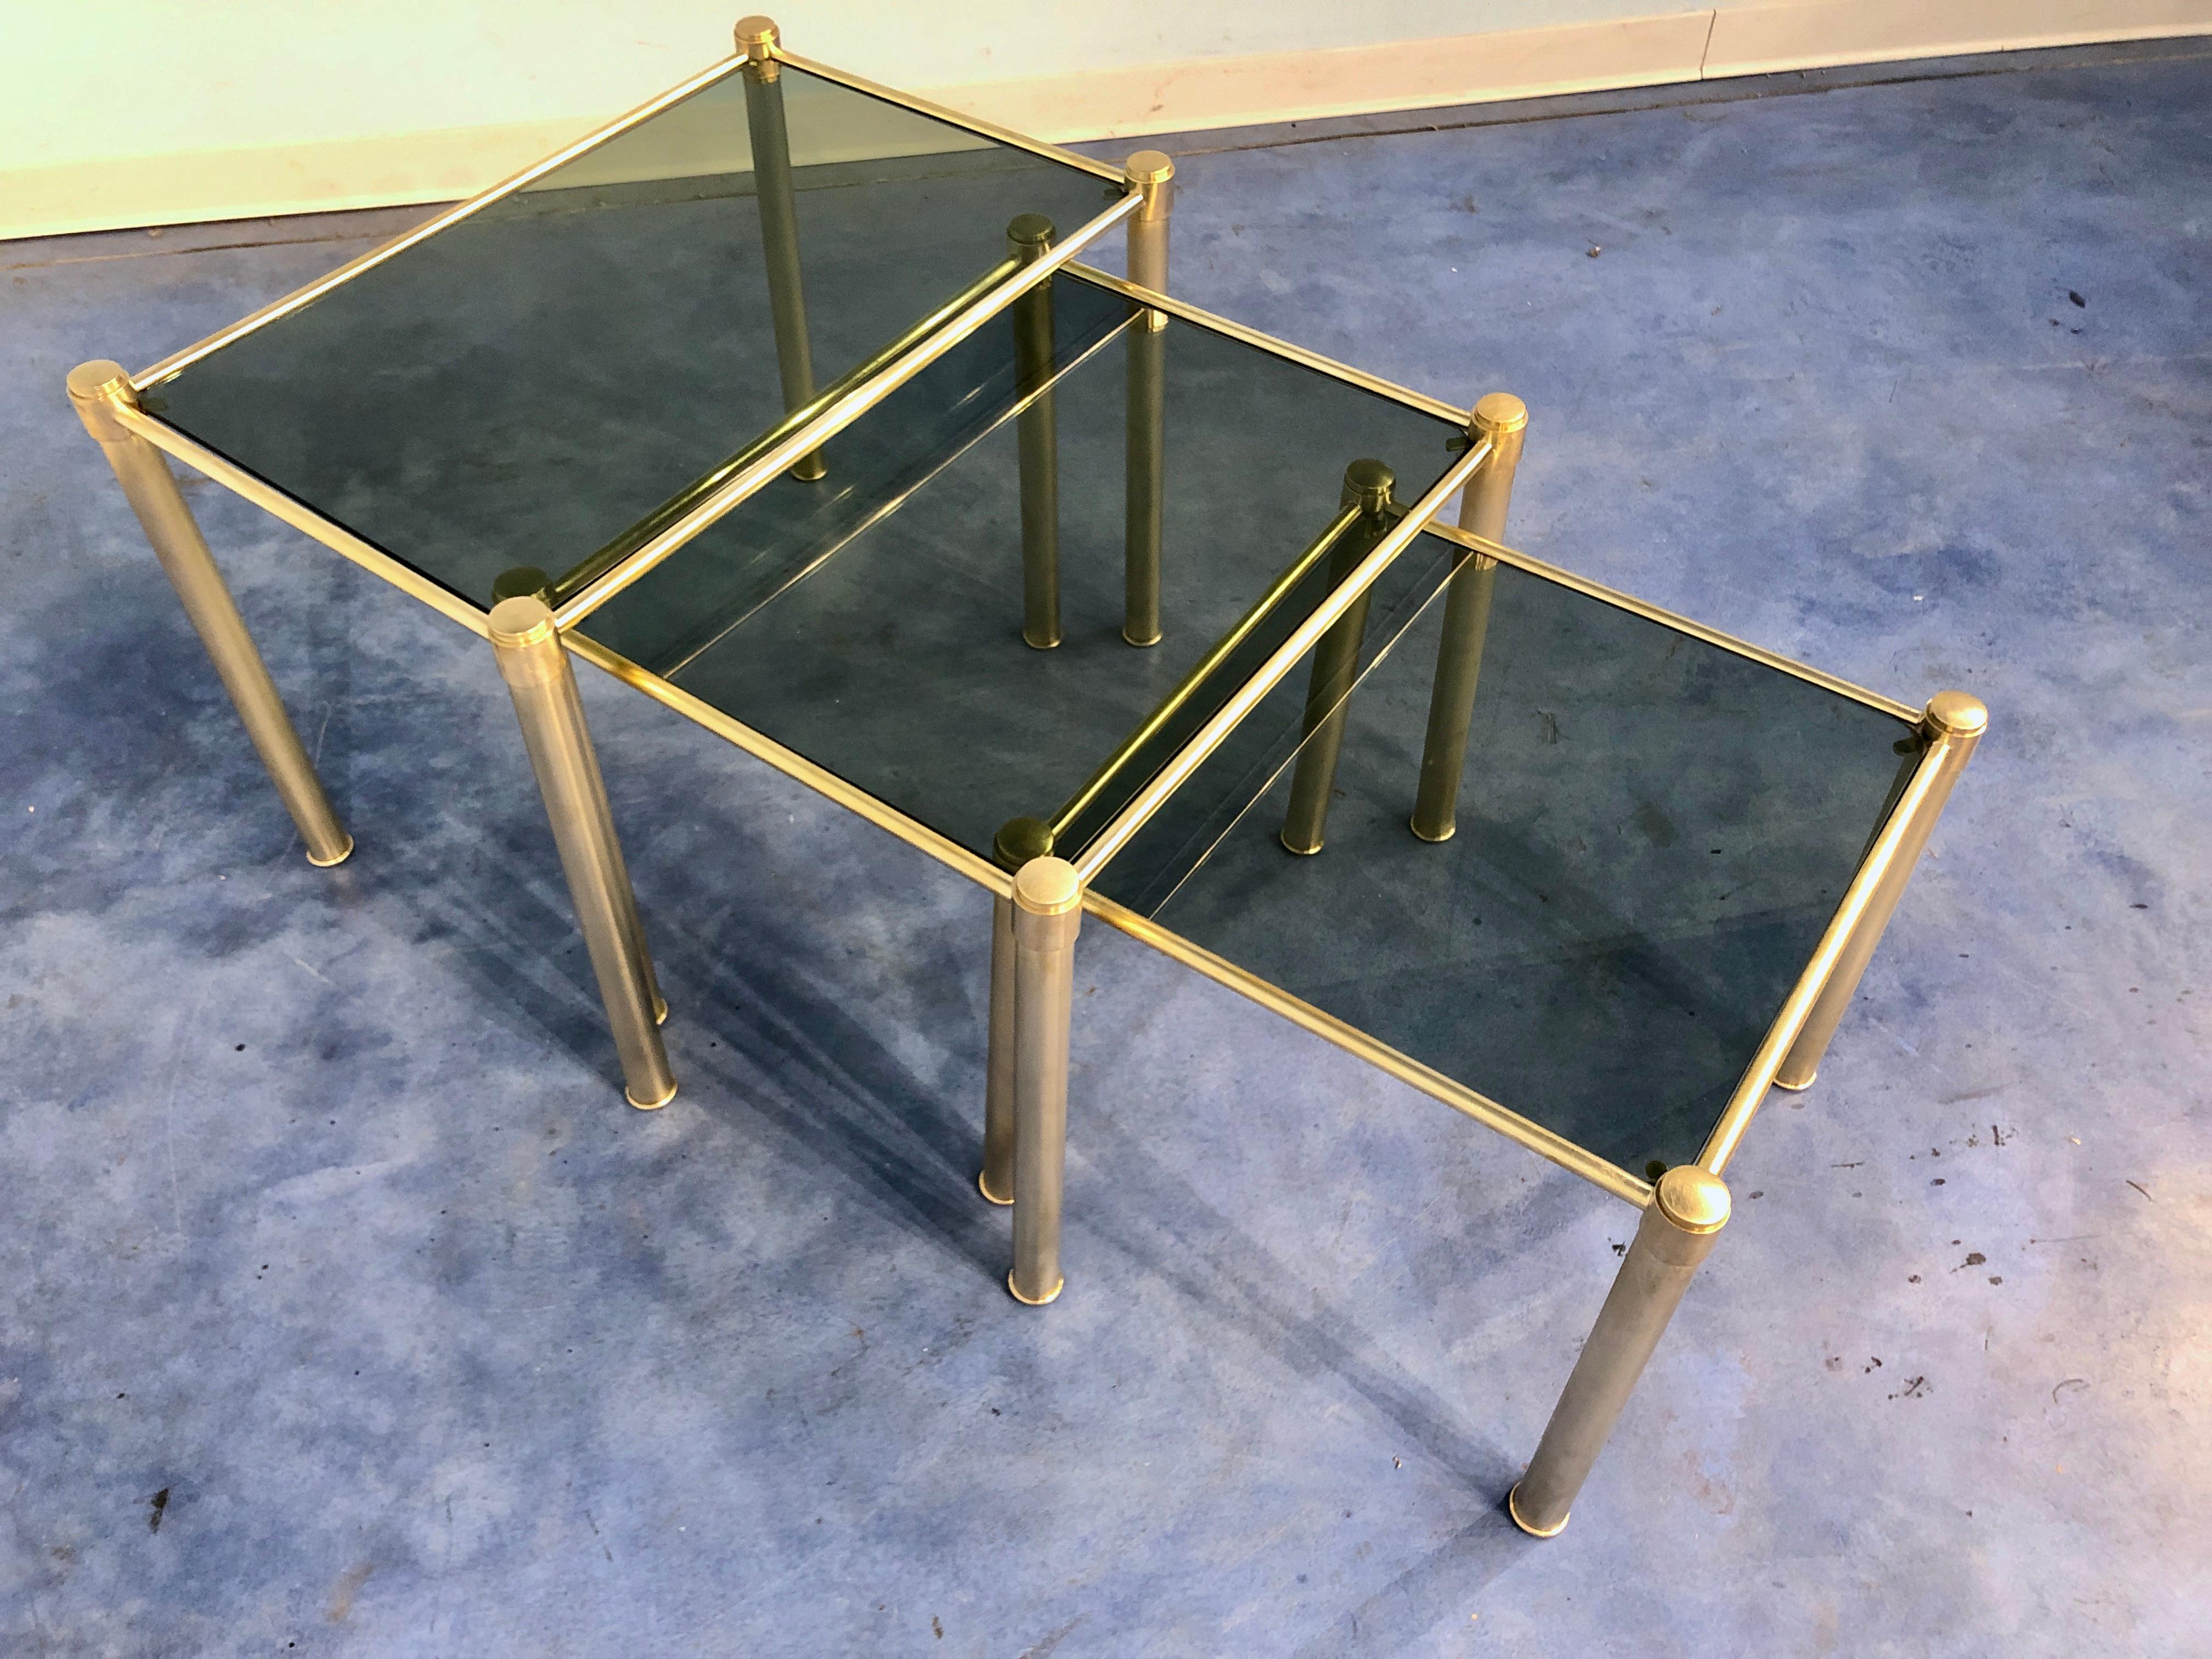 Italian Mid-Century Modern Brass and Smoked Glass Nesting Tables, 1970s For Sale 5